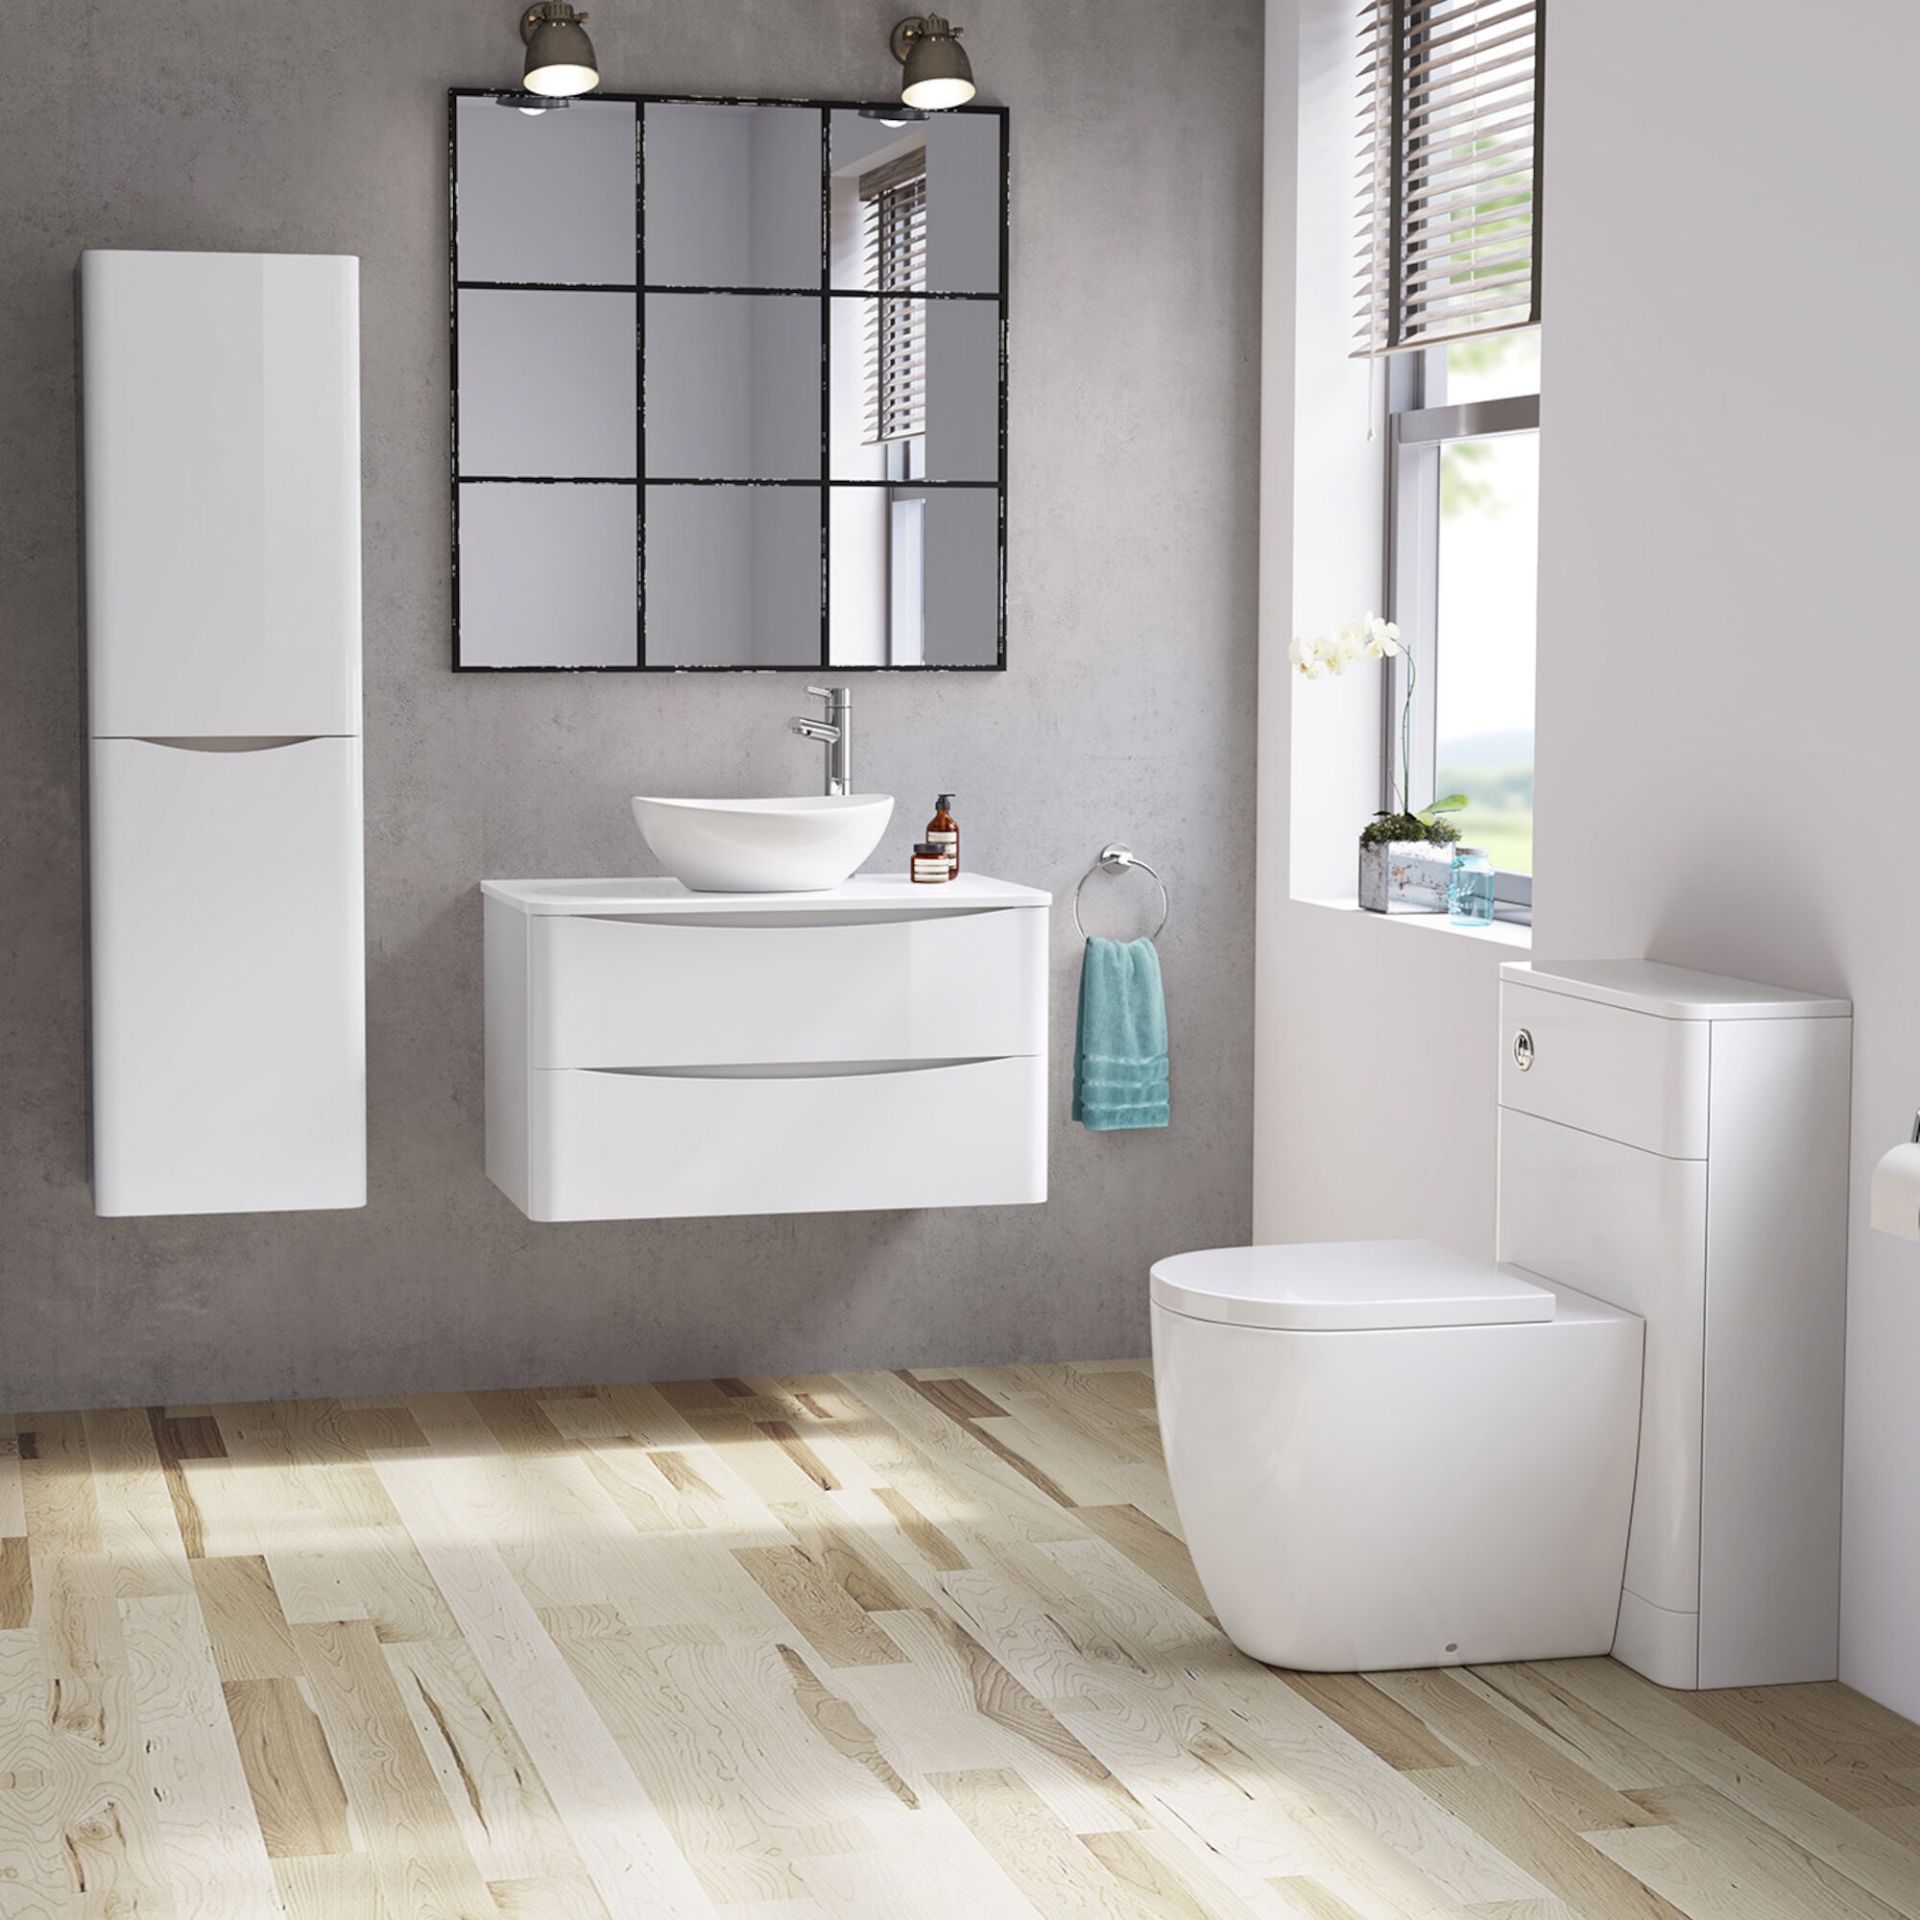 NEW & BOXED 1000mm Austin II Gloss White Countertop Unit and Camila Basin - Wall Hung. RRP £9... - Image 2 of 3